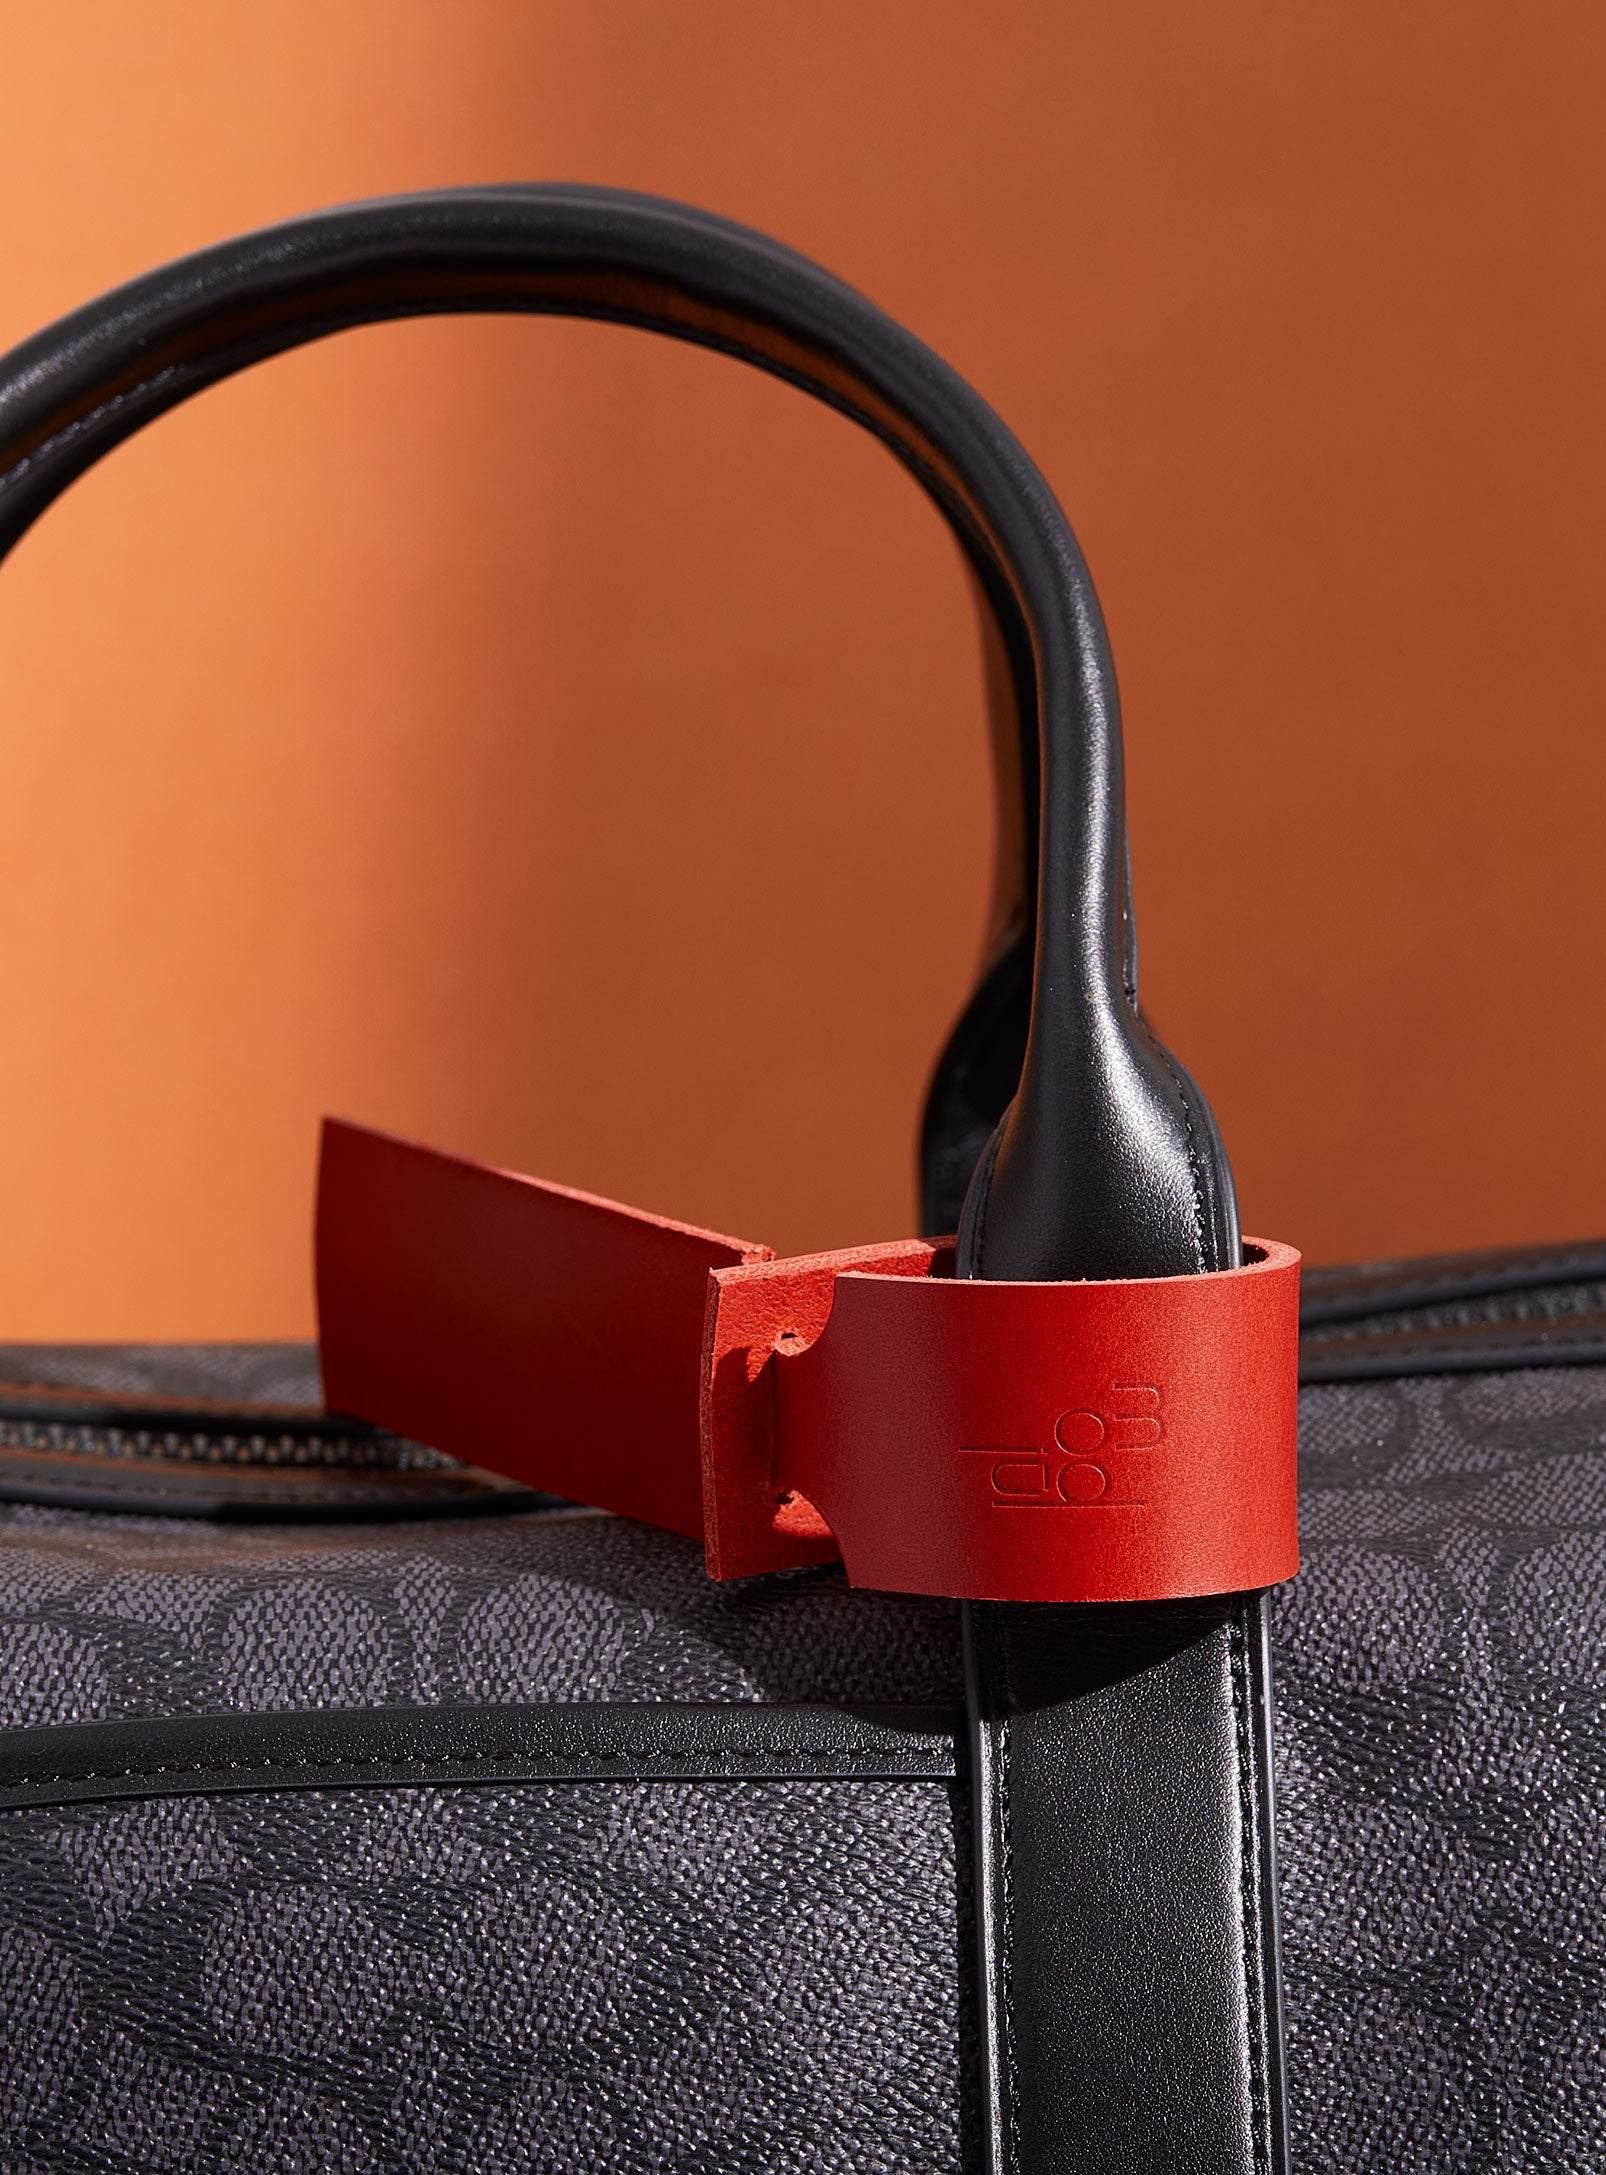 The modjūl leather traveller’s tag in red, displayed on a duffle bag. A luggage tag constructed using quality vegetable-dyed Italian leather with the option for personalization.